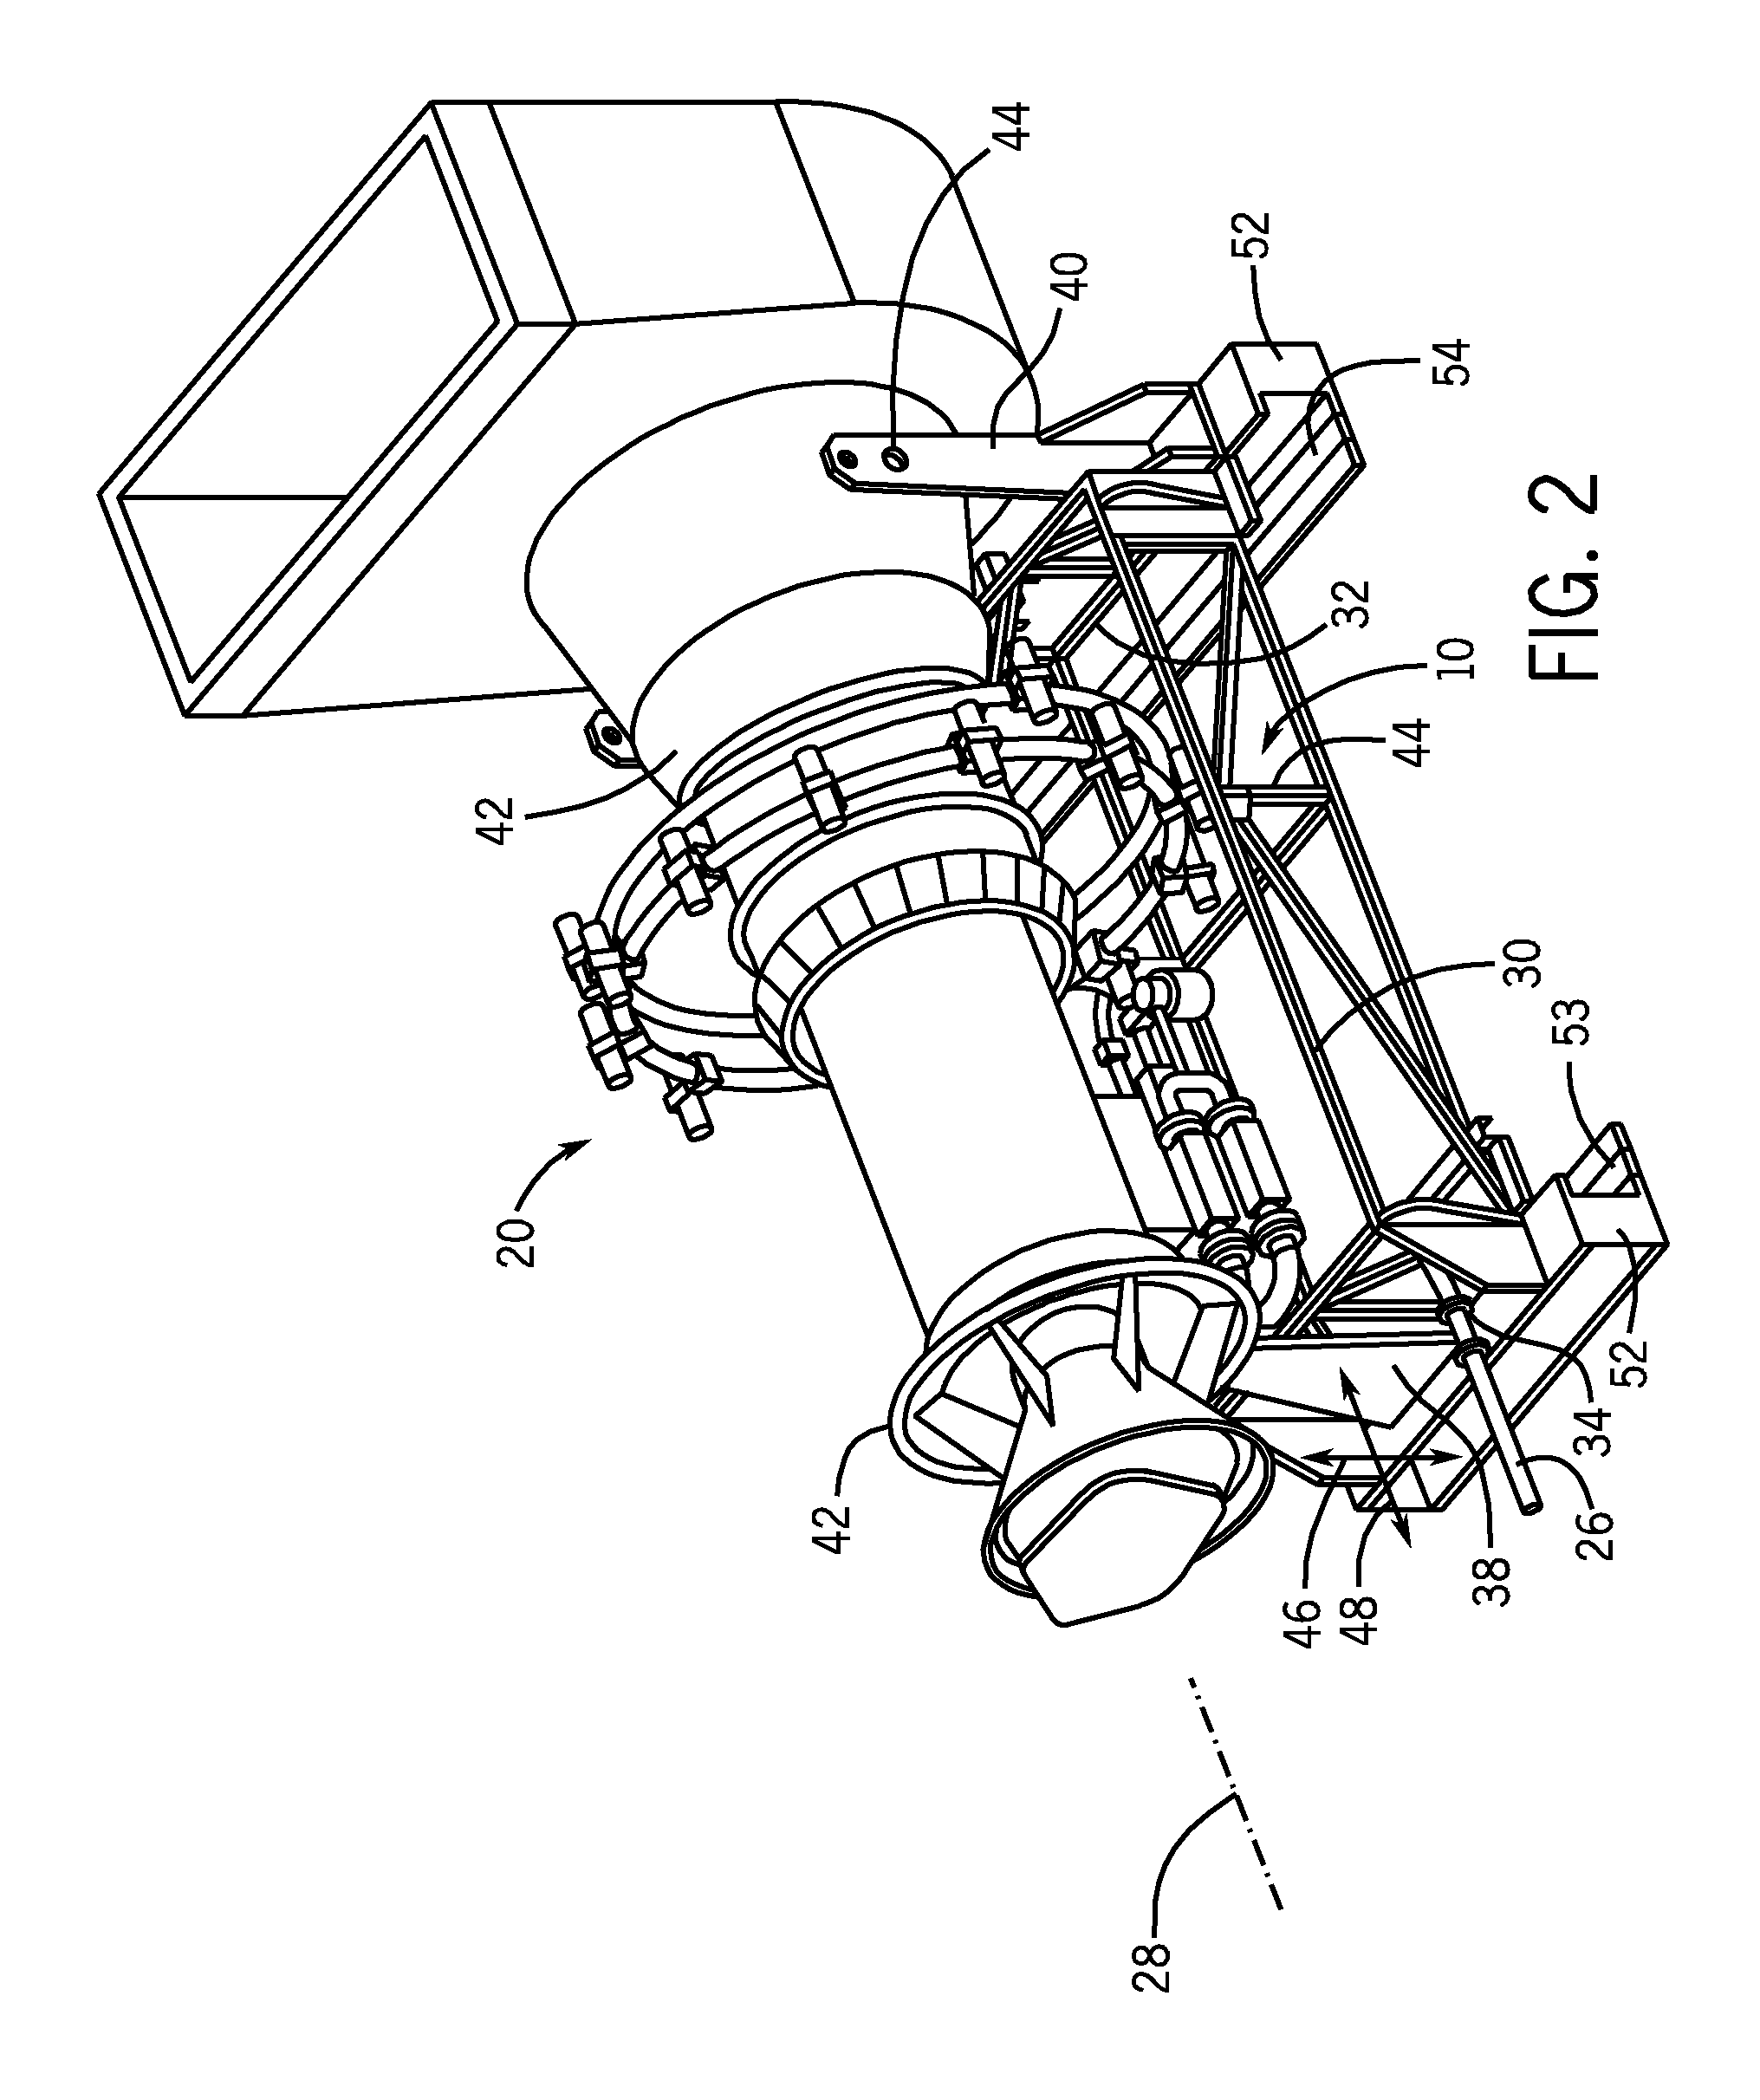 Multipurpose support system for a gas turbine